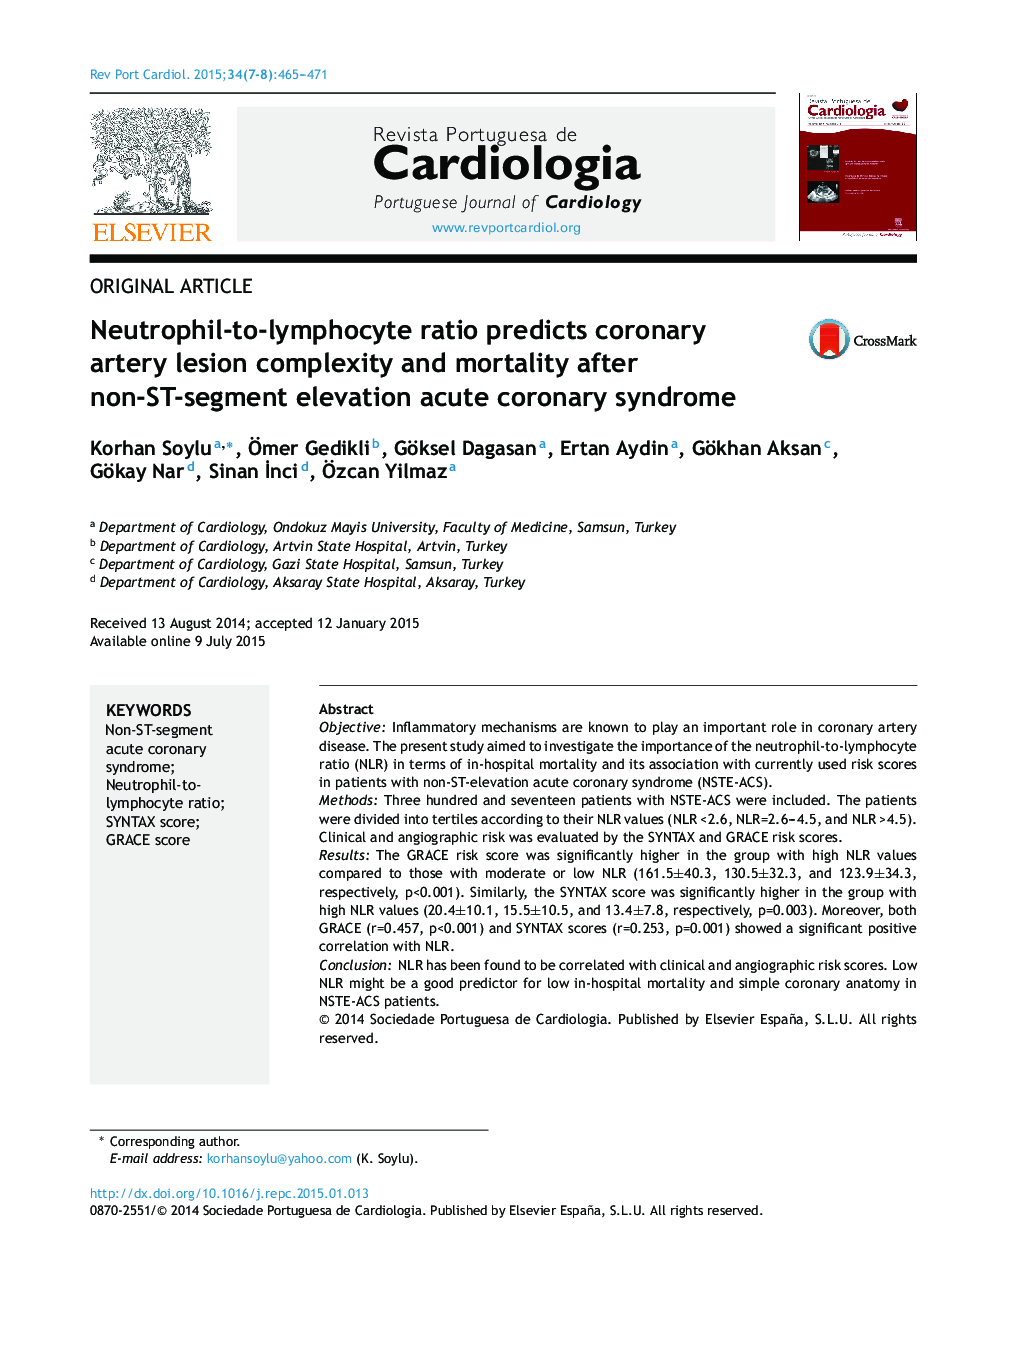 Neutrophil-to-lymphocyte ratio predicts coronary artery lesion complexity and mortality after non-ST-segment elevation acute coronary syndrome